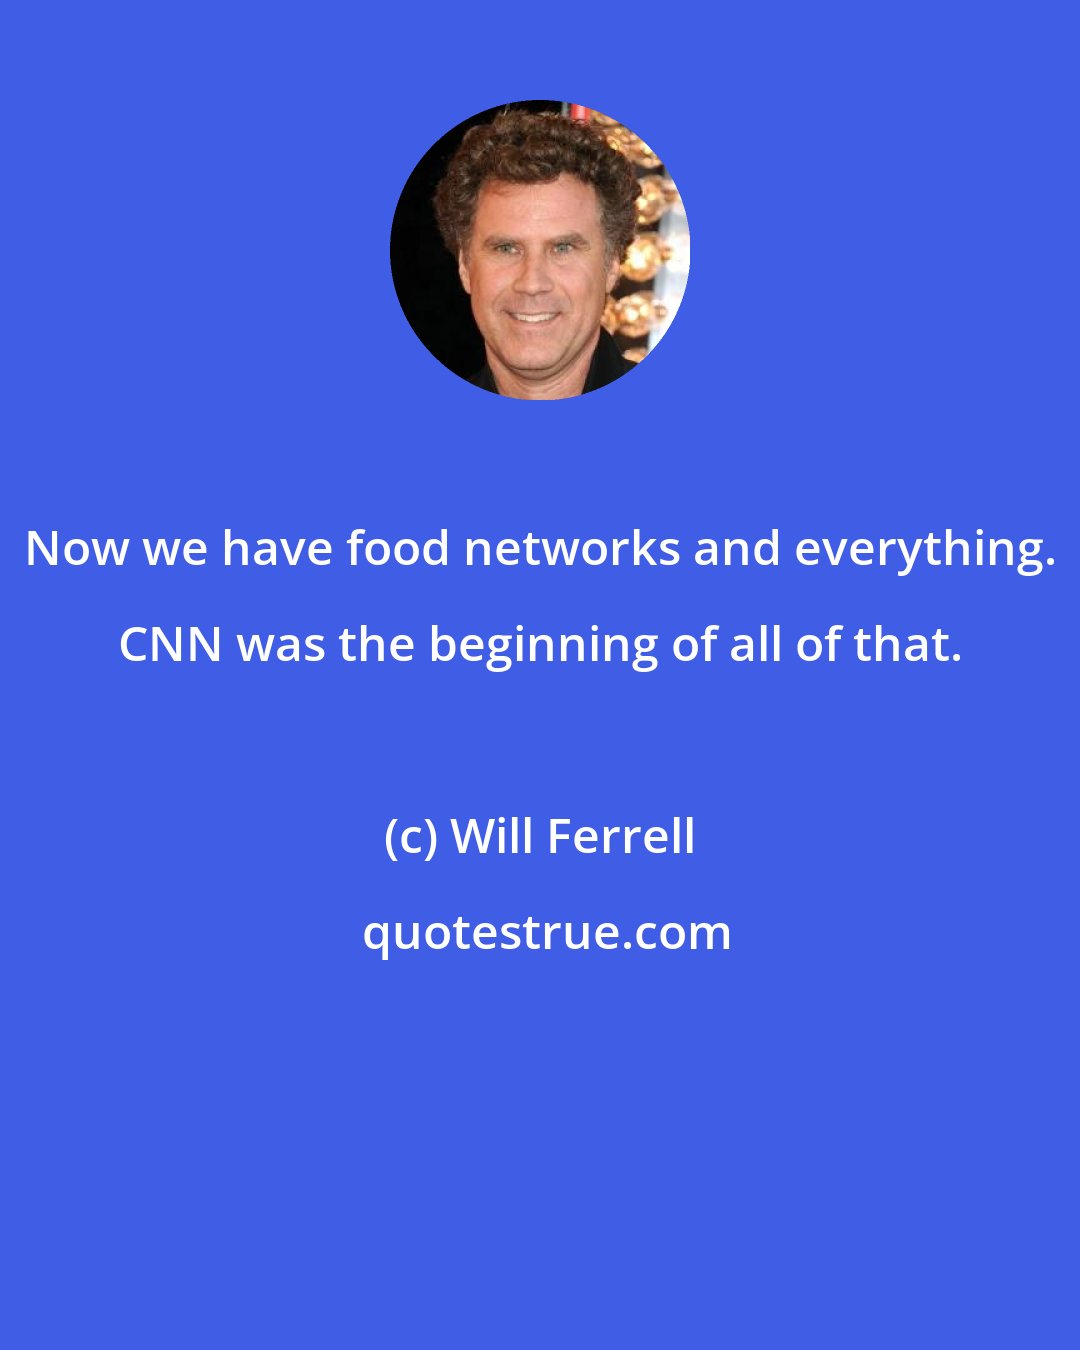 Will Ferrell: Now we have food networks and everything. CNN was the beginning of all of that.